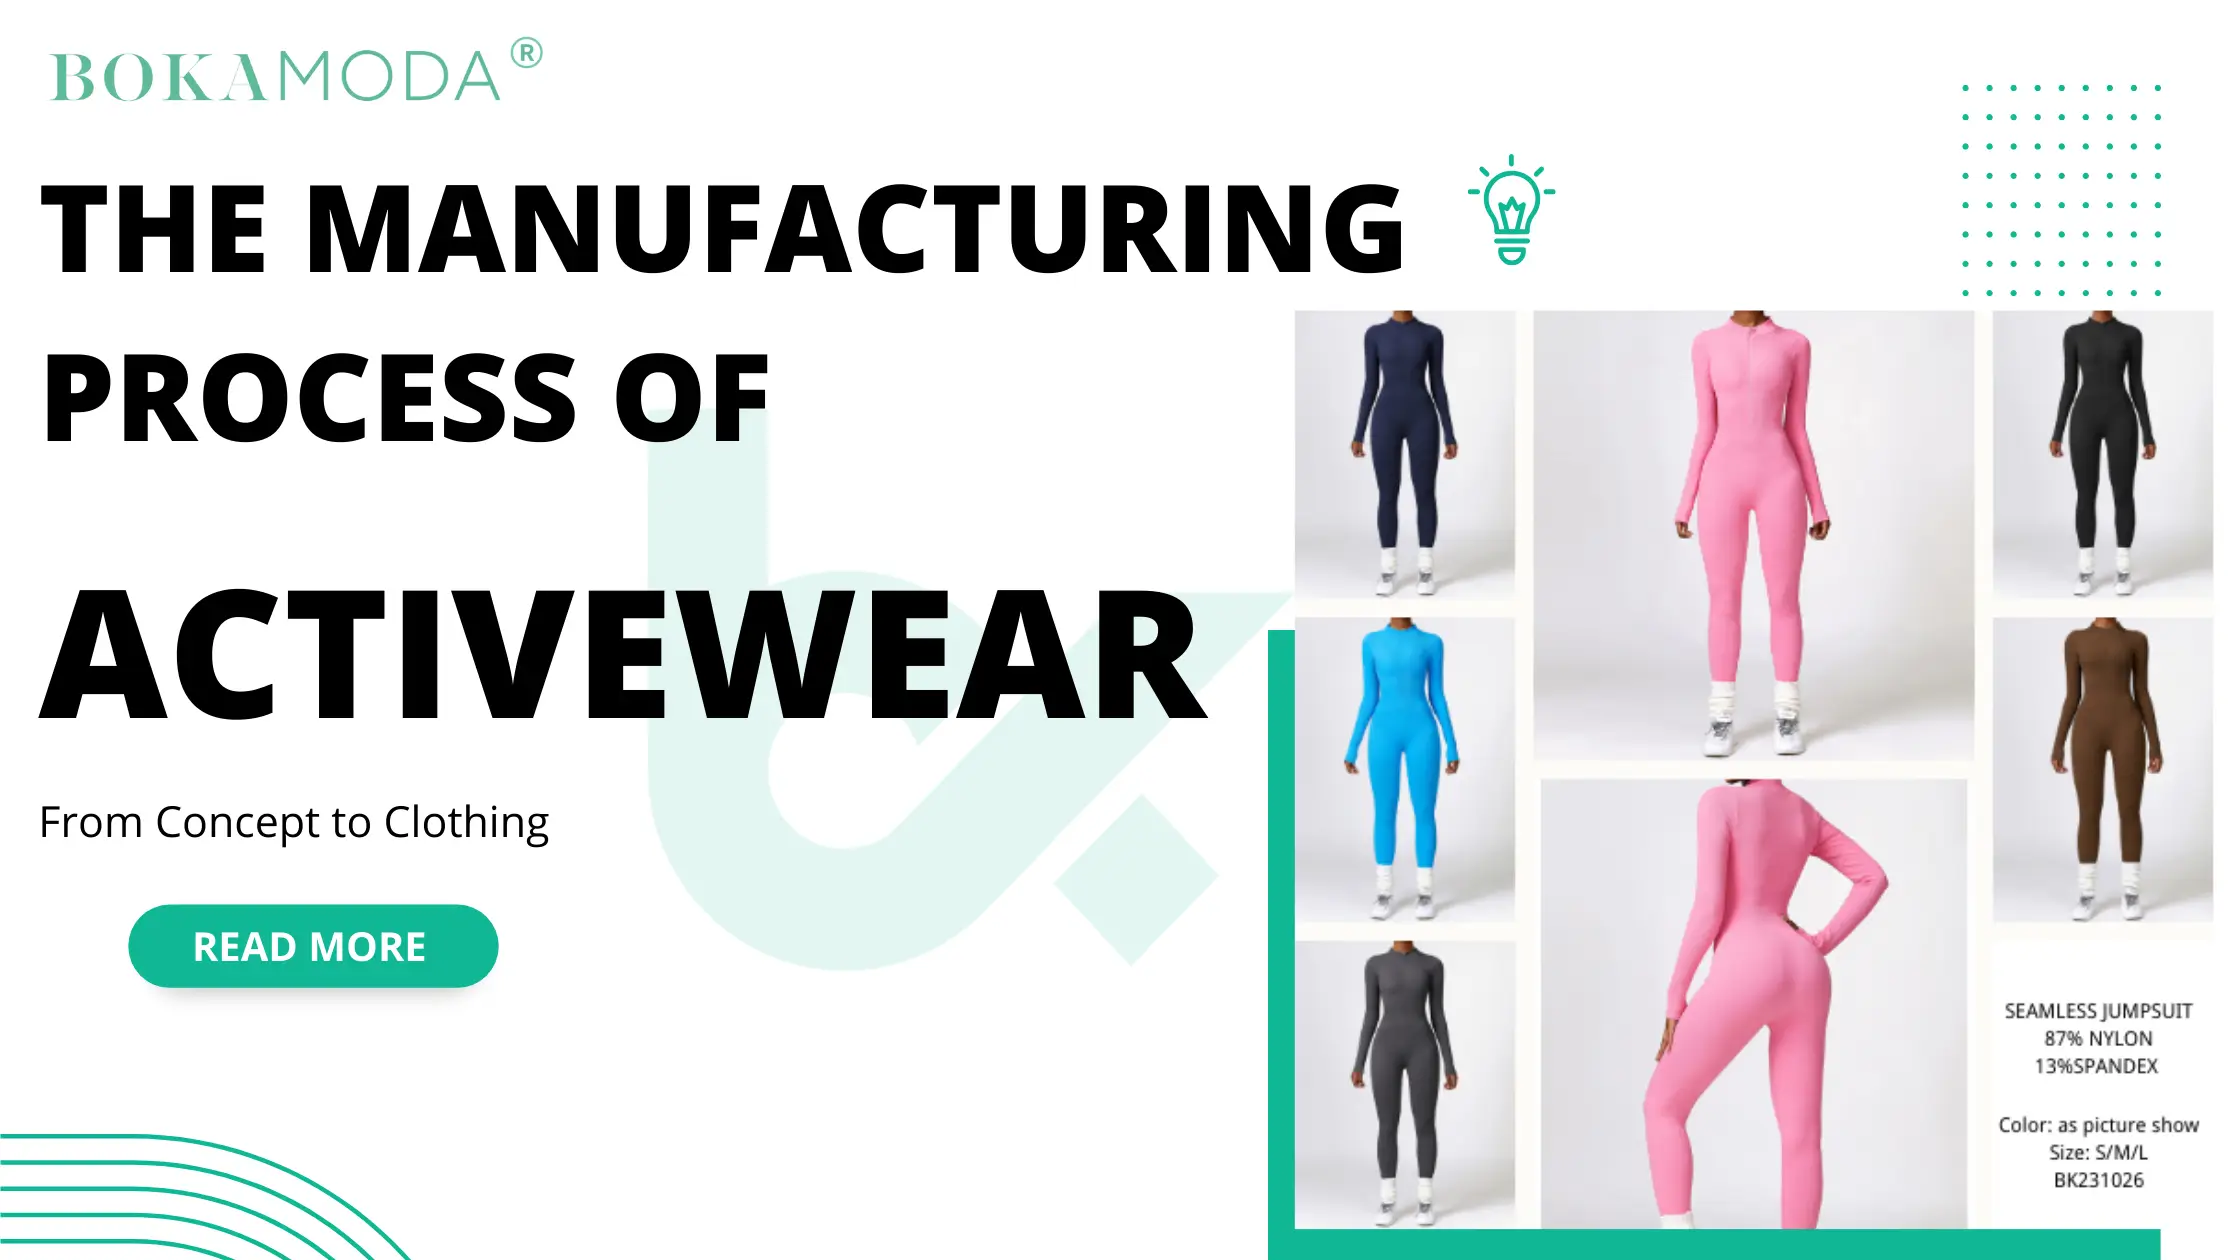 From Concept to Clothing: The Manufacturing Process of activewear 